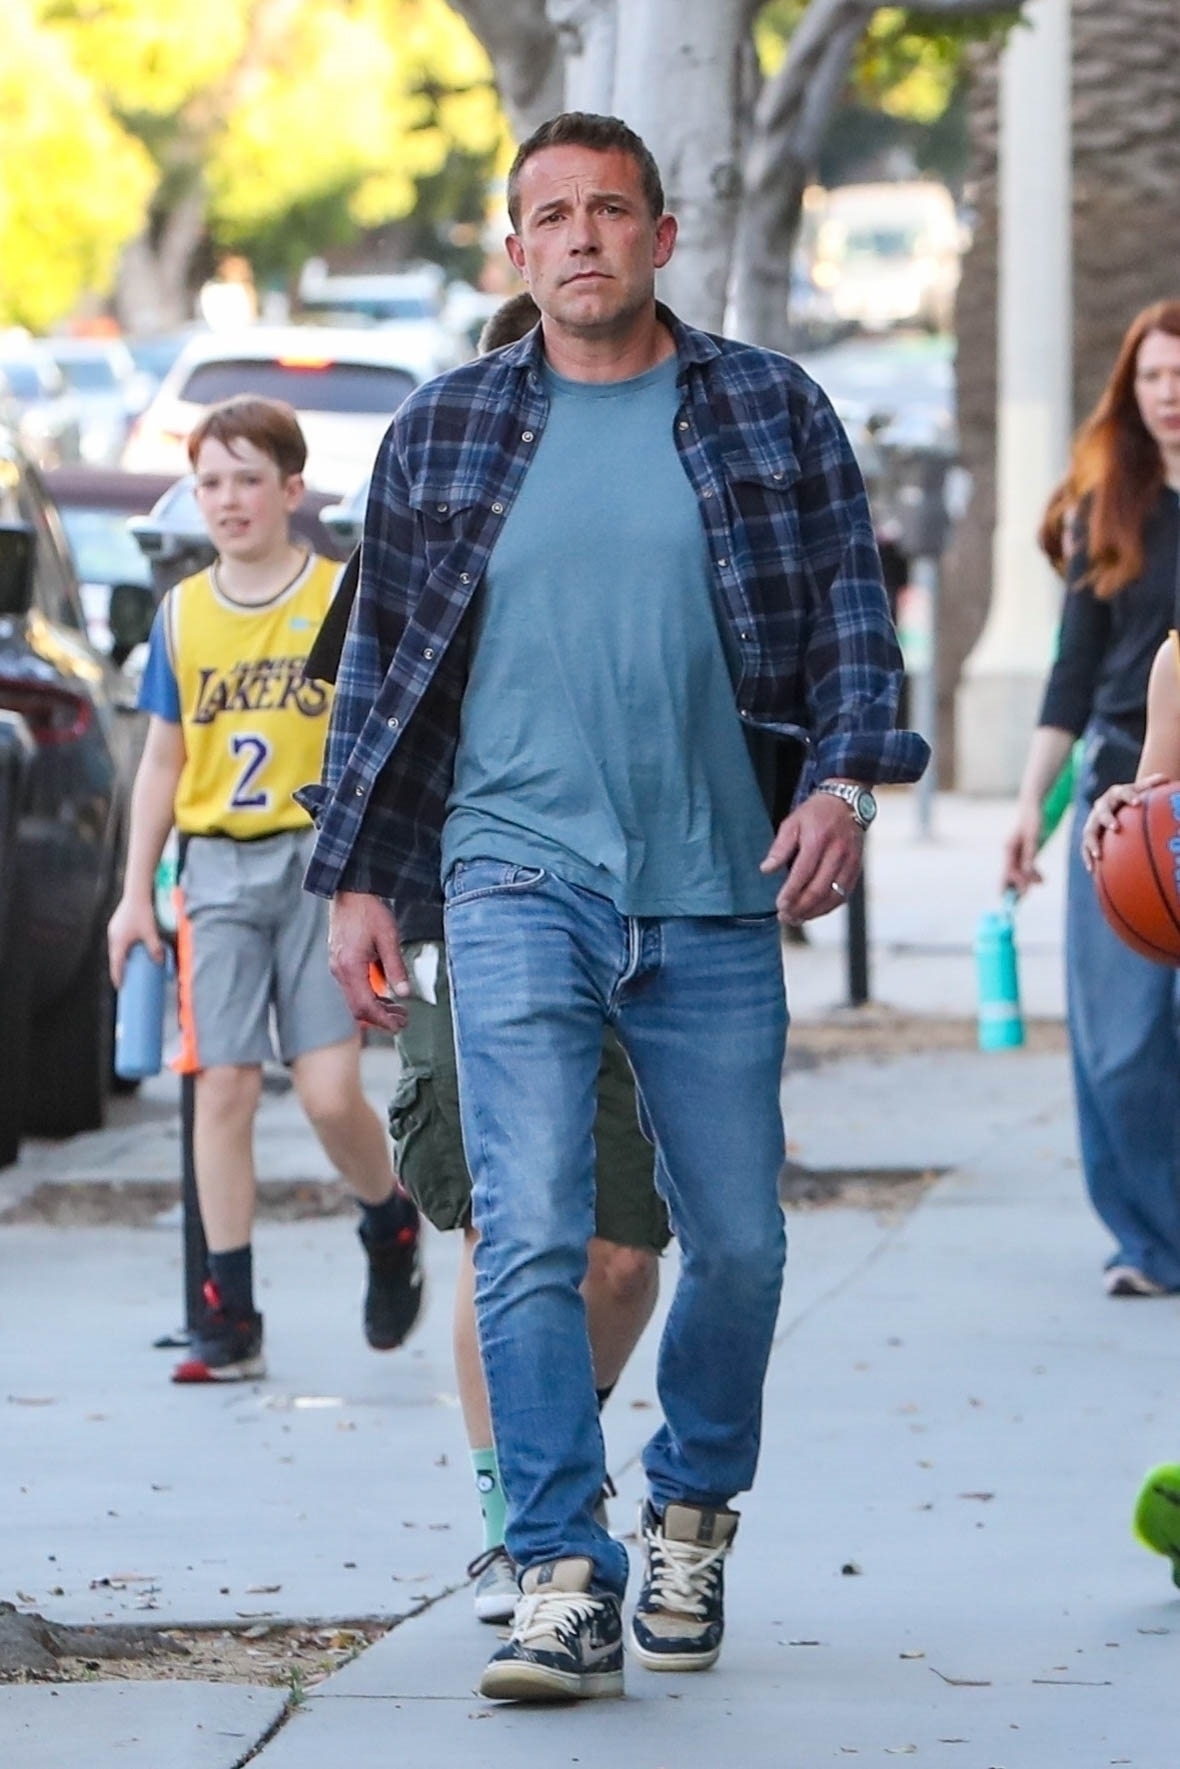 Ben was also seen wearing his wedding band while picking his son up from basketball practice in another part of town